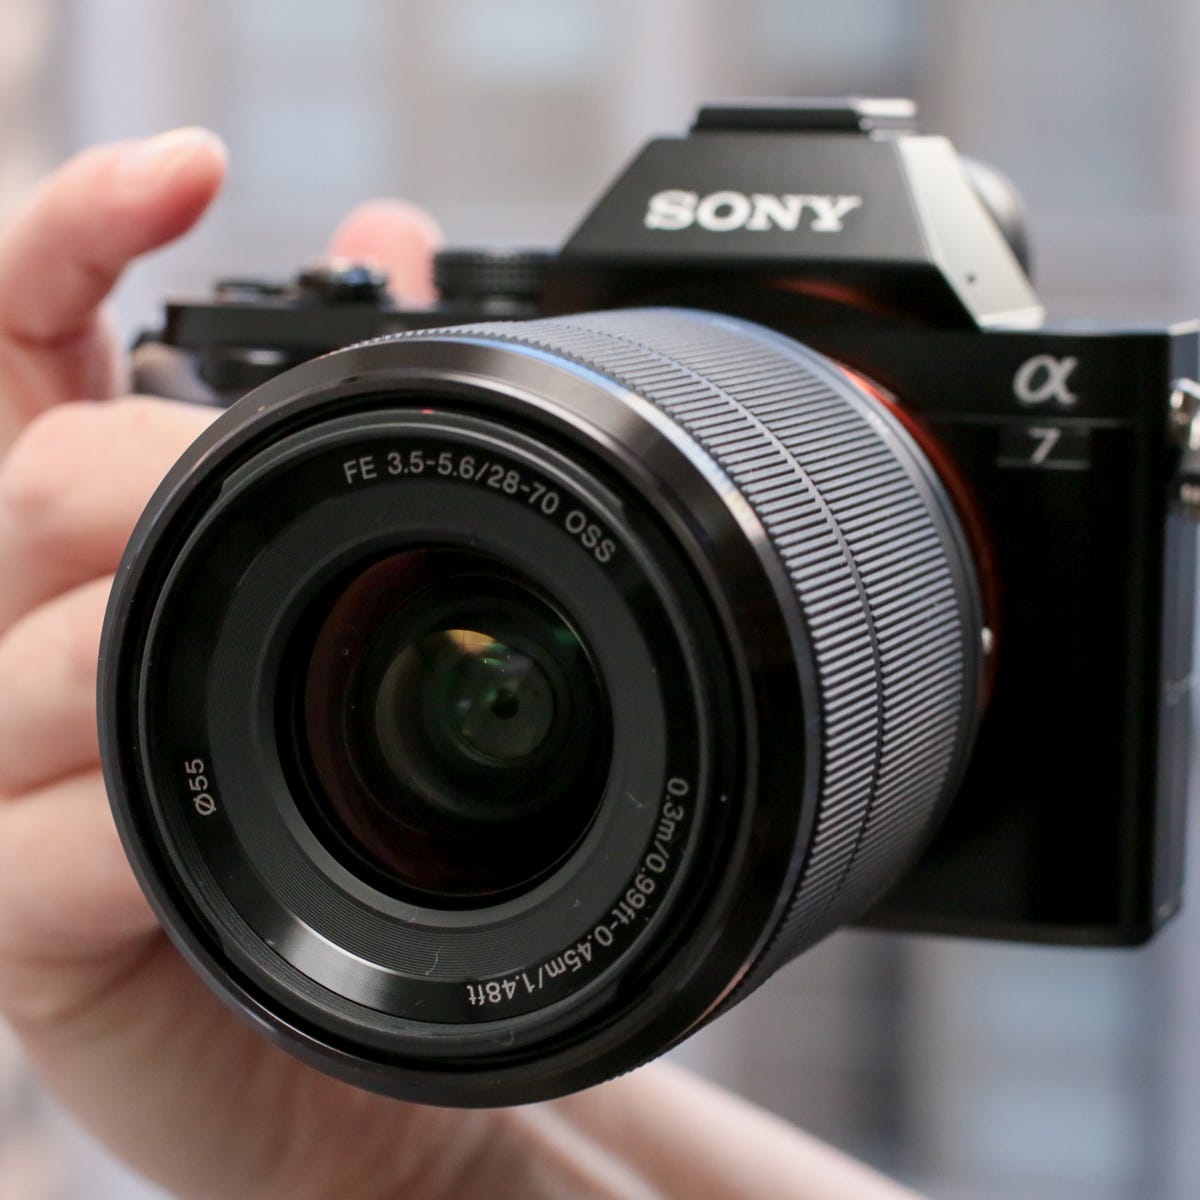 Sony Alpha ILCE-7 (with 28-70mm Lens) review: A welcome step-up